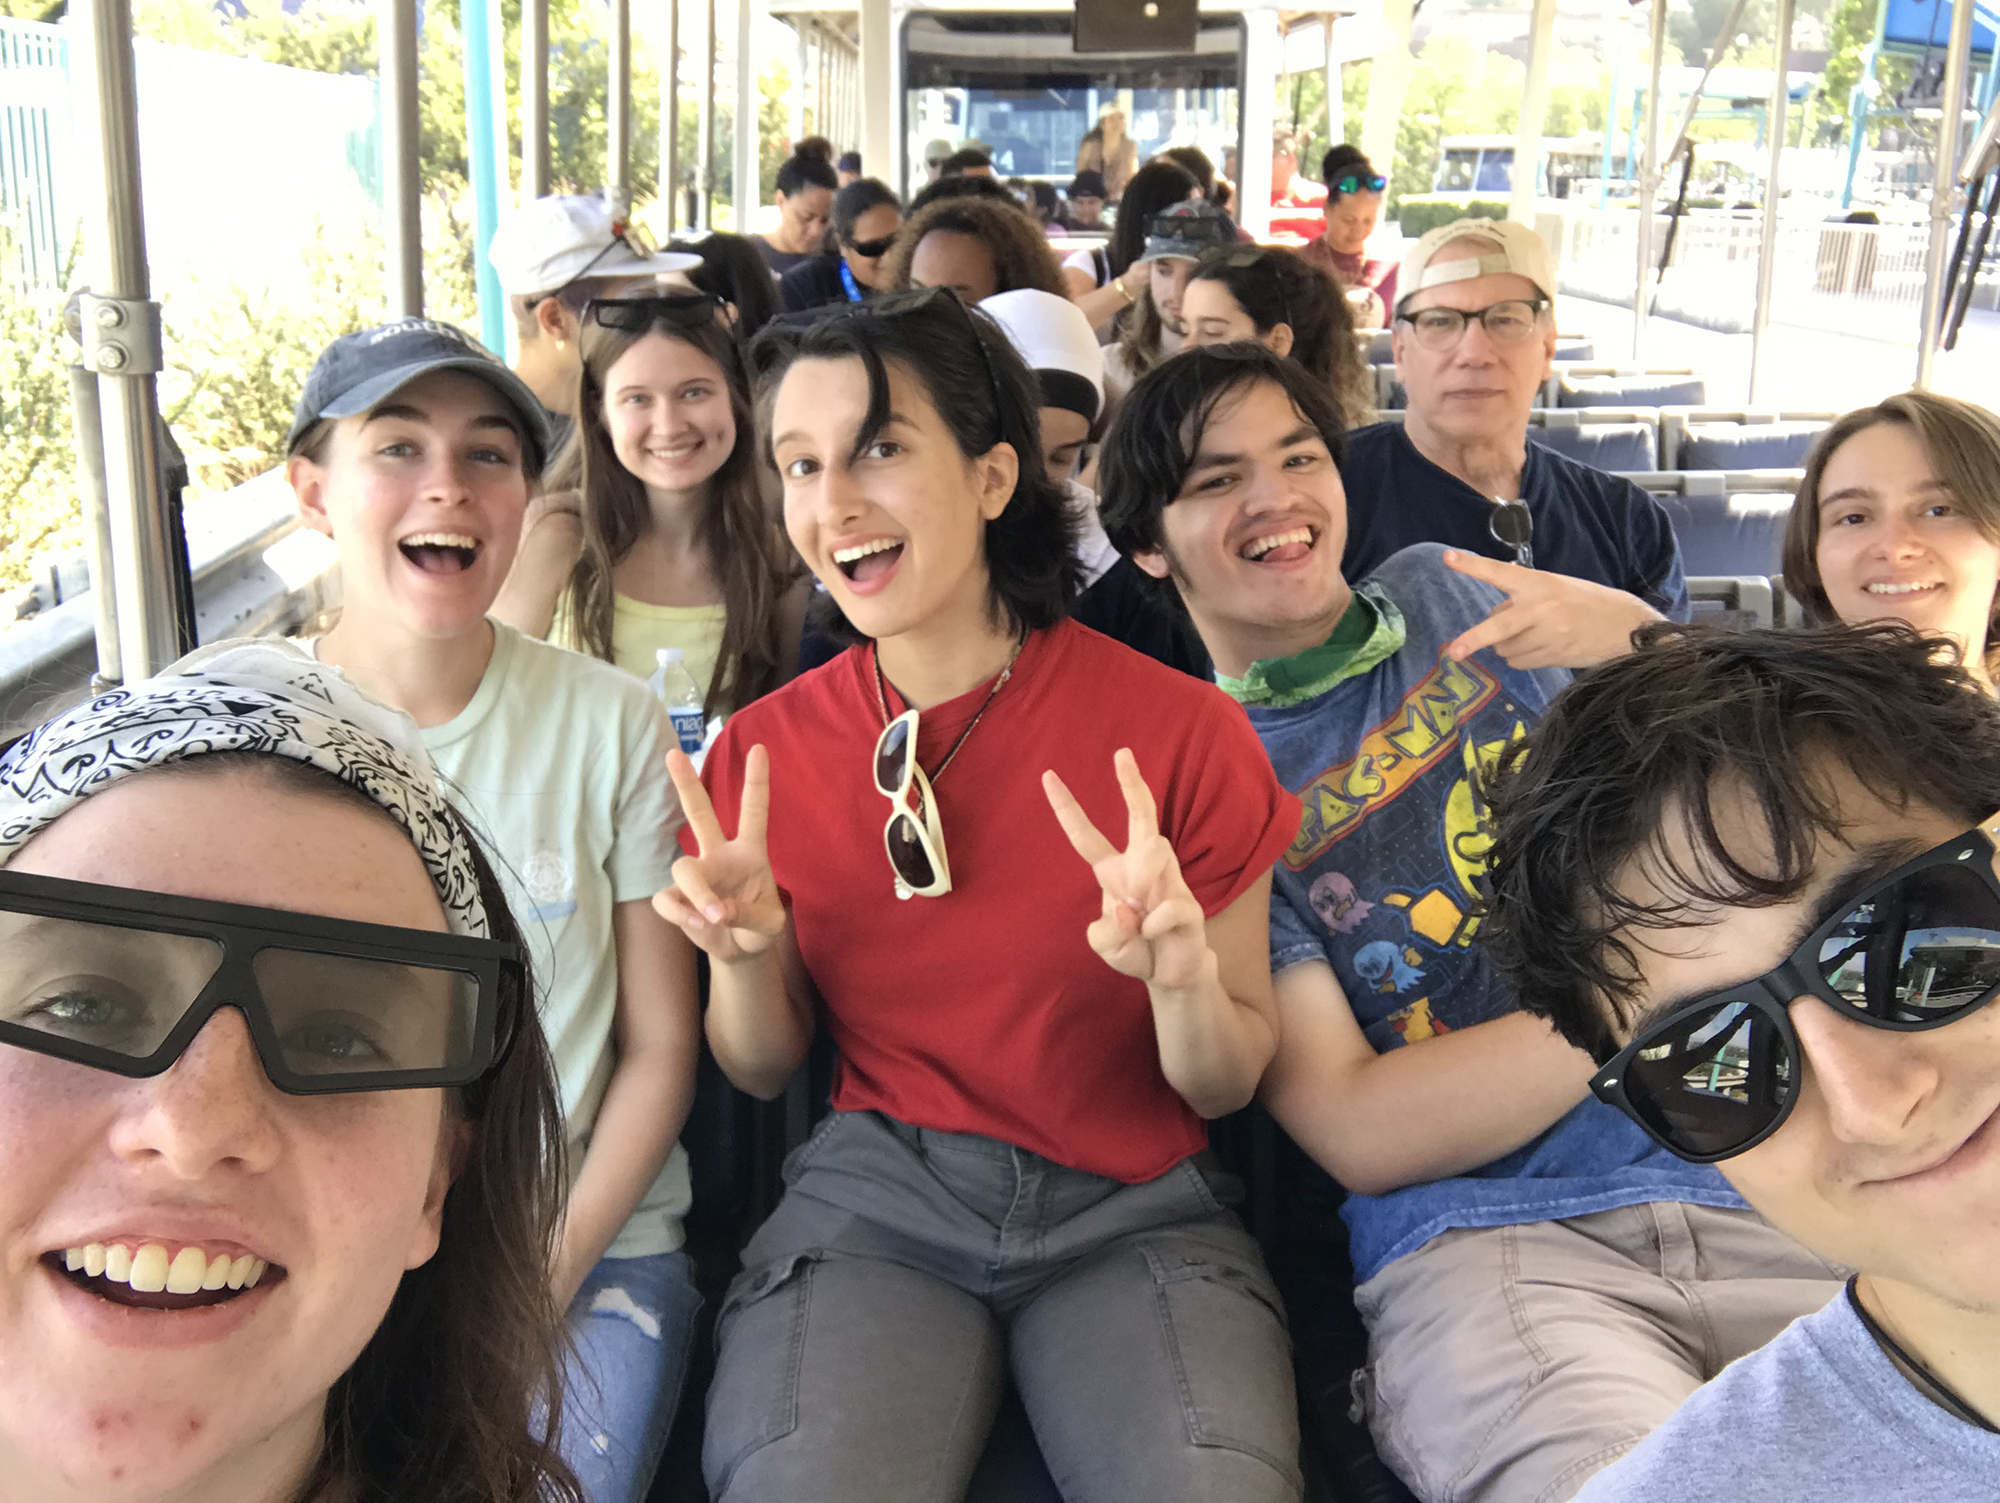 A group of student take a group selfie on a bus.